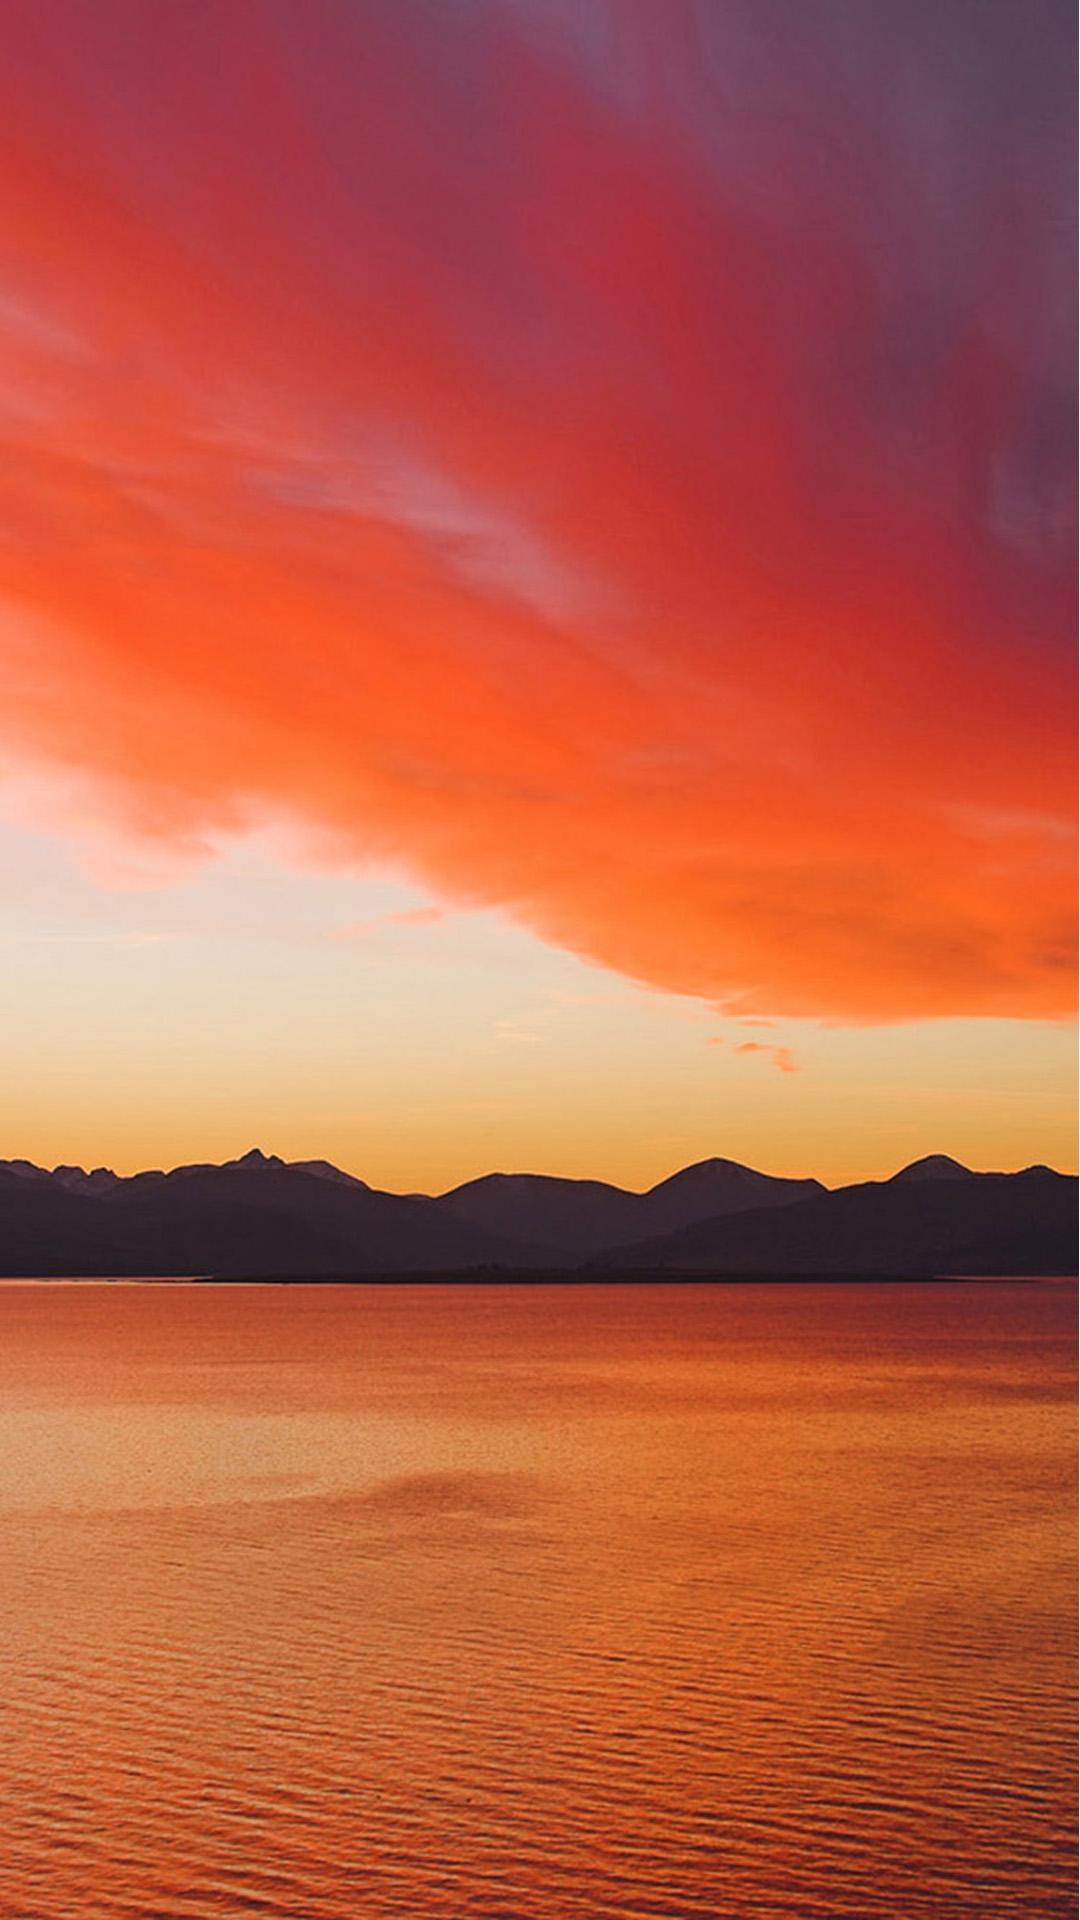 Sunset over the Cuillin Mountains on the Isle of Skye from Kyle of Lochalsh. Android wallpaper HD wallpaper